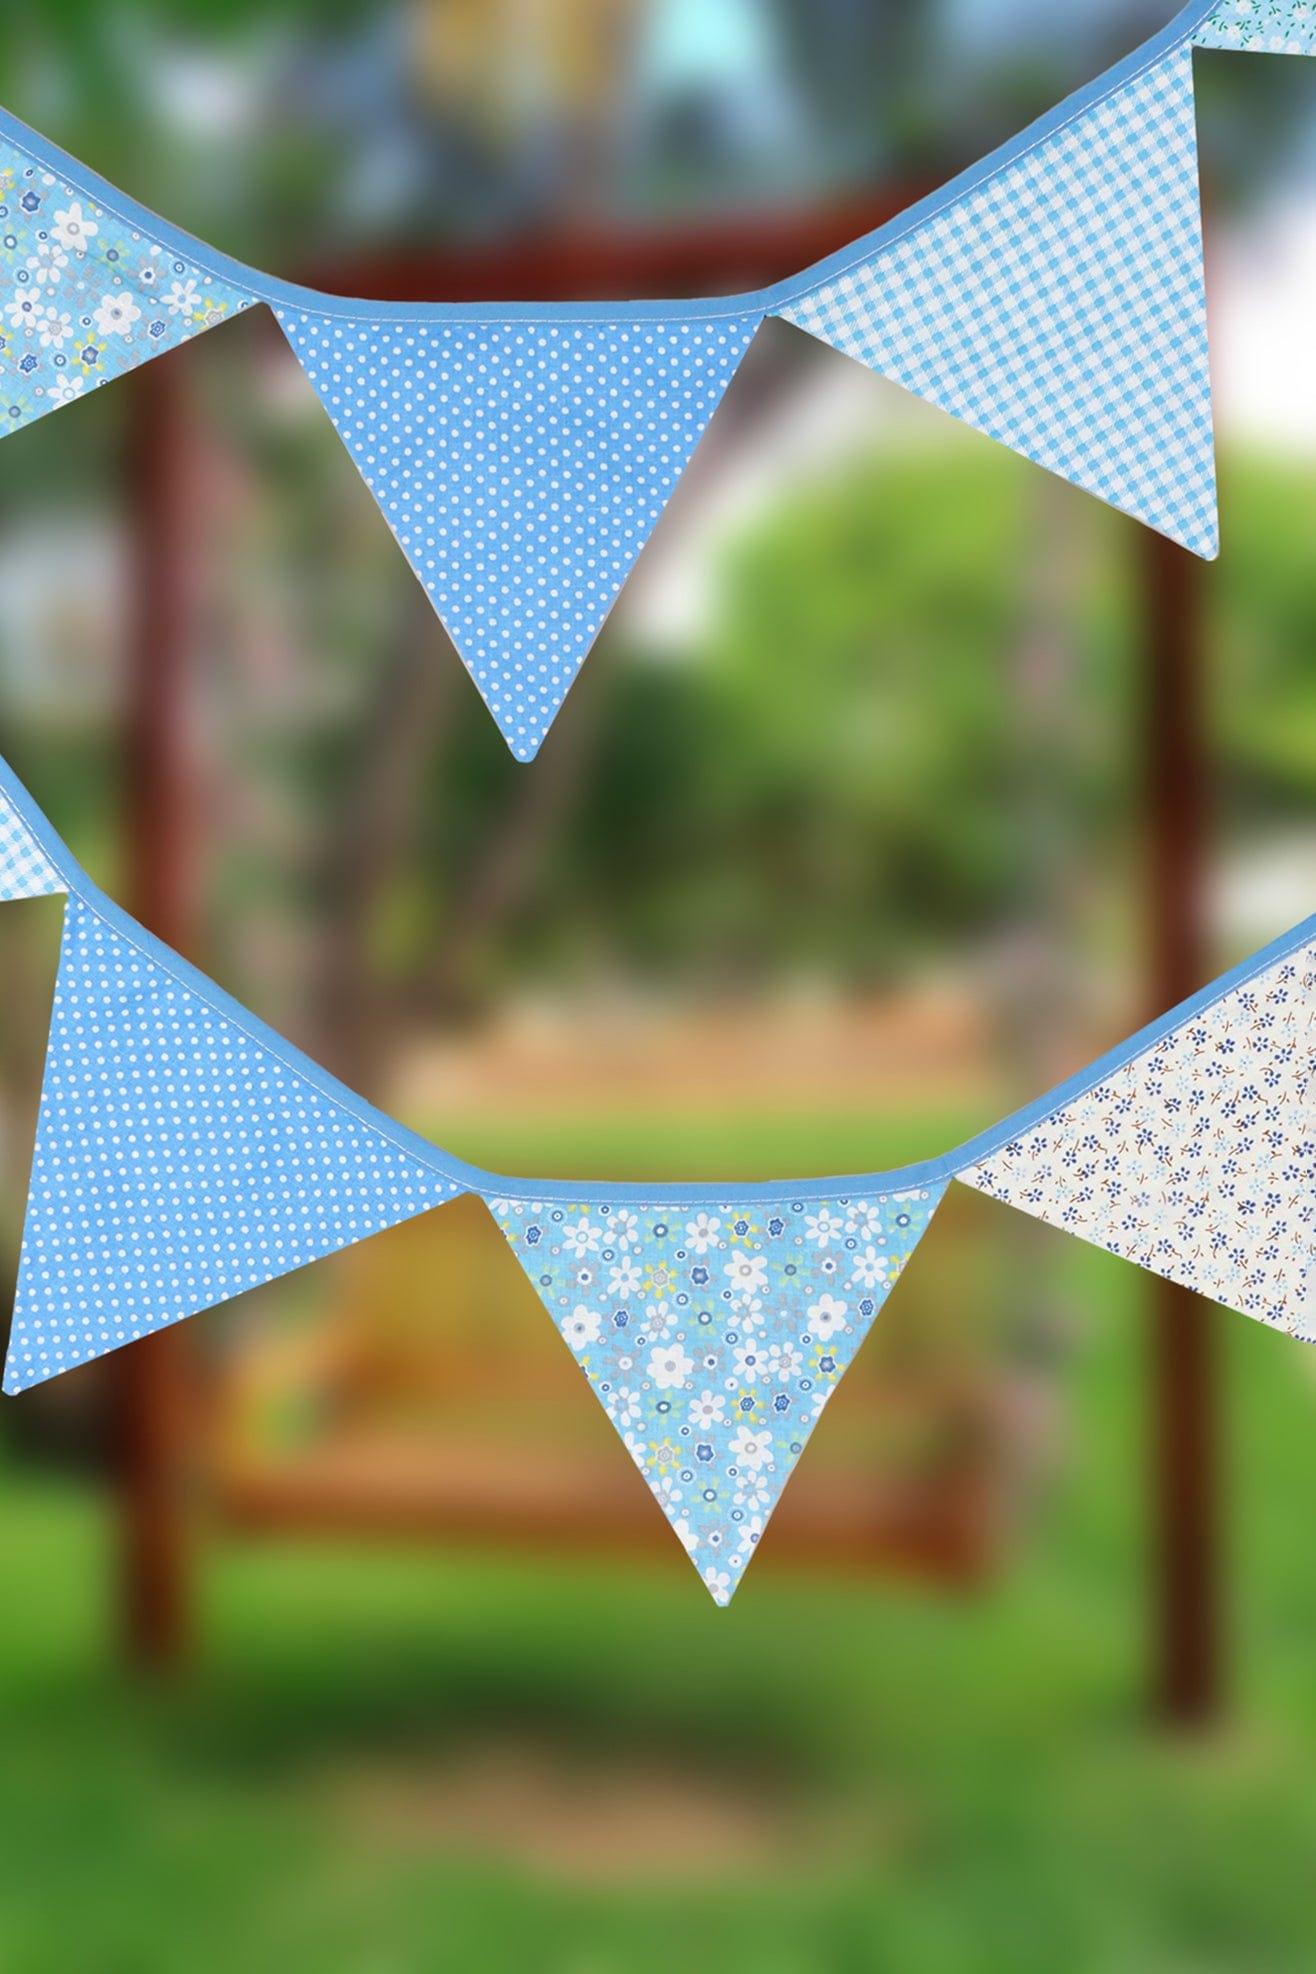 G Decor Bunting Blue Whimsical Waves: Blue and White Patterned Cloth Bunting